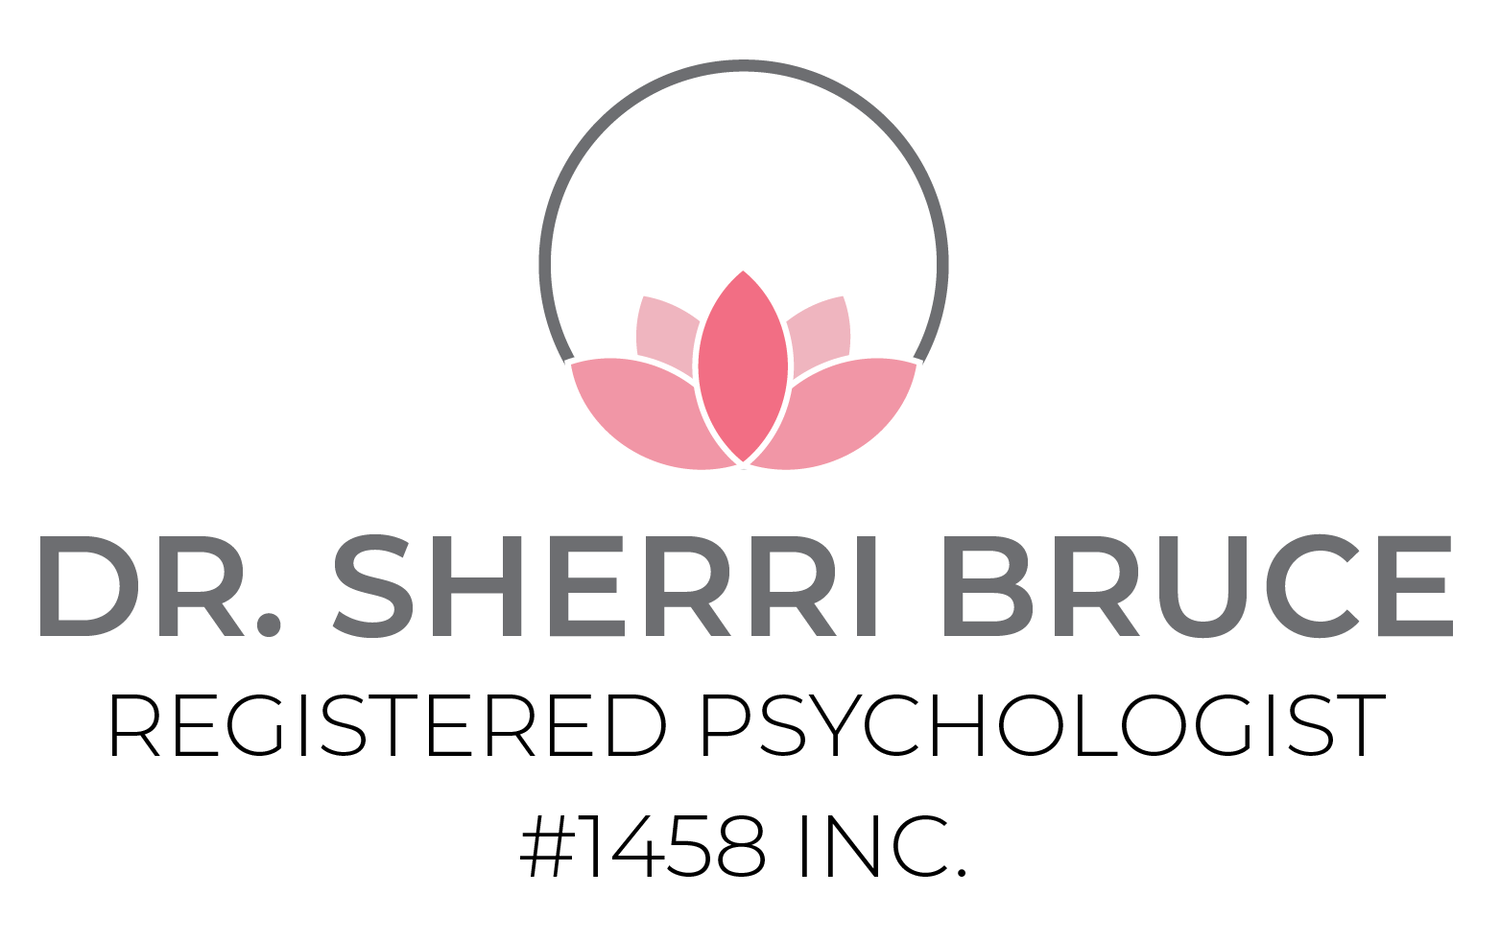 Holistic Therapy Cobble Hill | DR. SHERRI BRUCE REGISTERED PSYCHOLOGIST #1458 INC. 